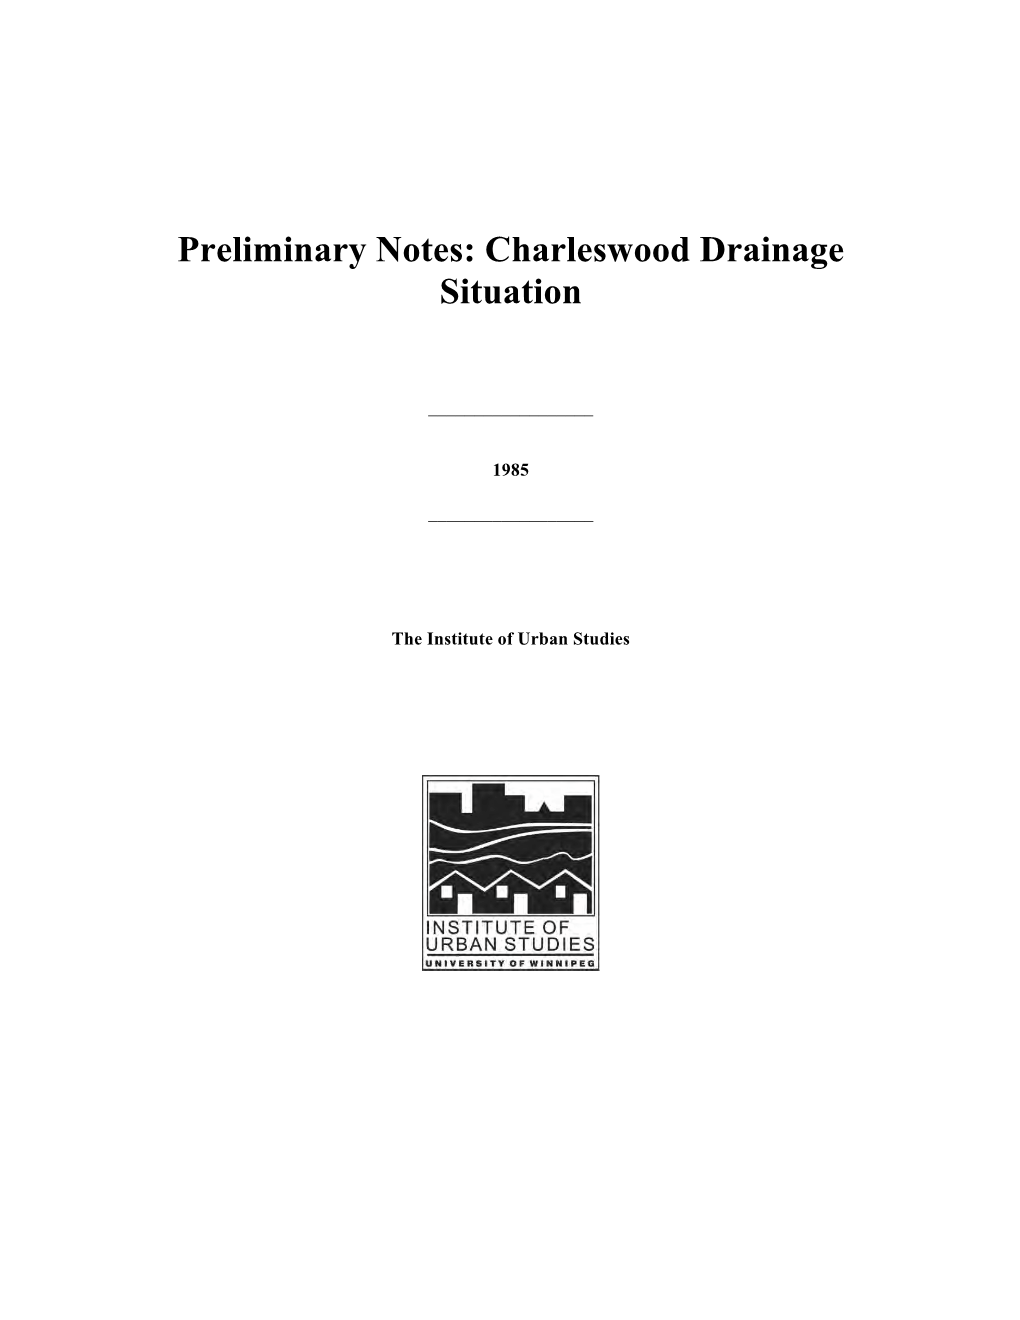 Preliminary Notes : Charleswood Drainage Situation